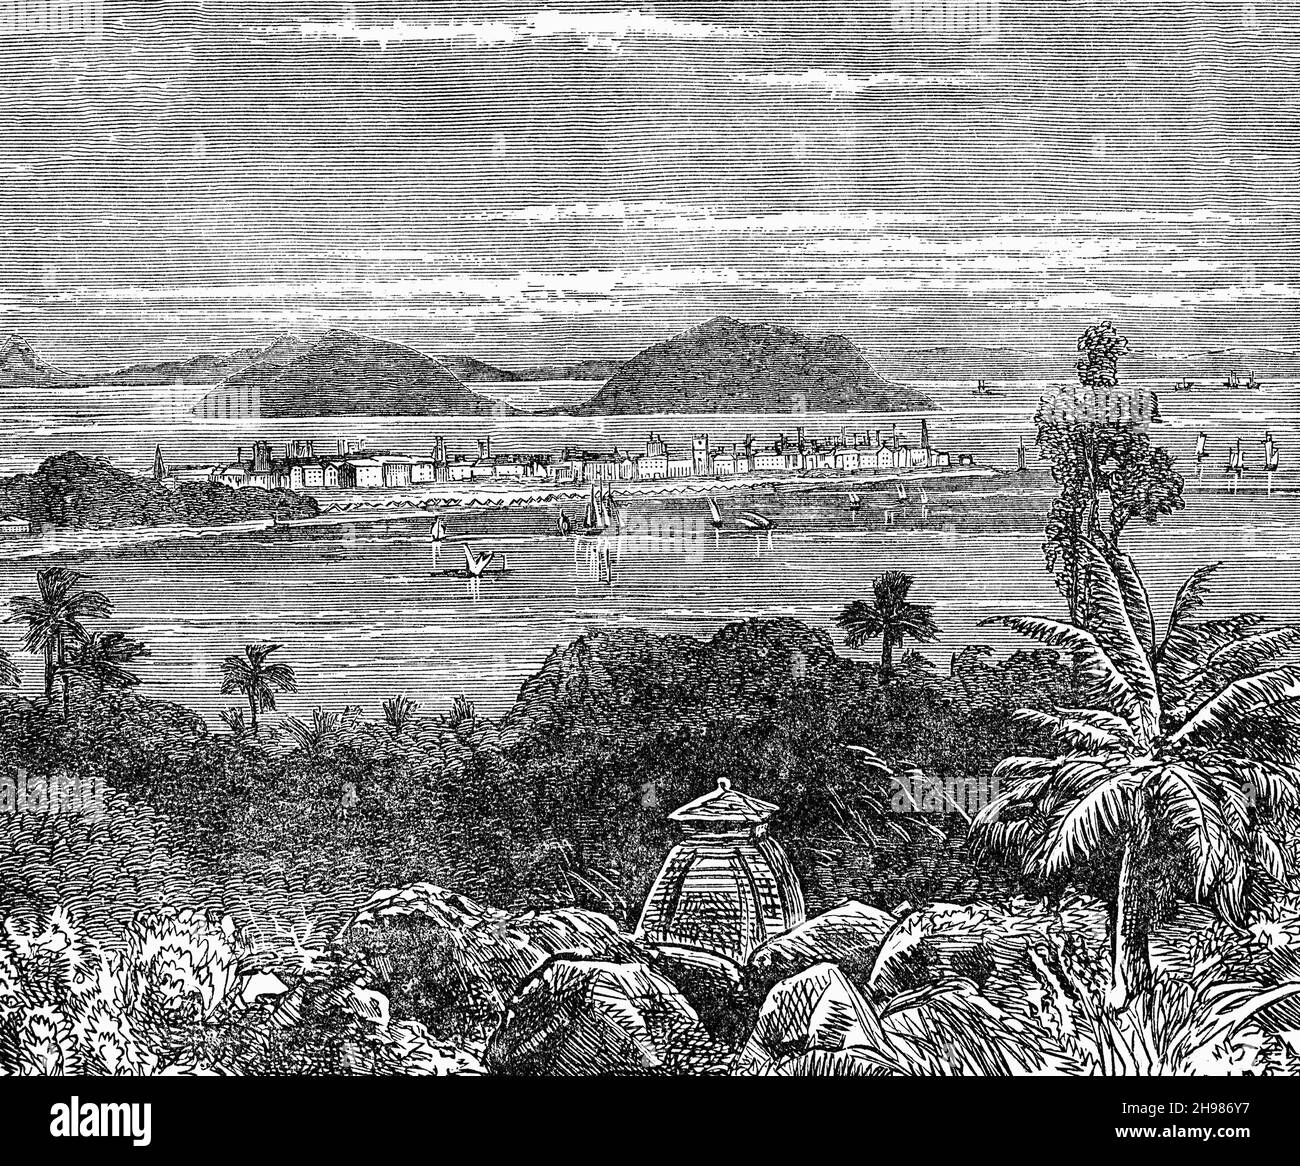 A late 19th Century illustration of the Indian city of Bombay, before it developed into a large city. Now known as Mumbai from 1995, the capital city of the Indian state of Maharashtra lies on the Konkan coast on the west coast of India and has a deep natural harbour. Stock Photo